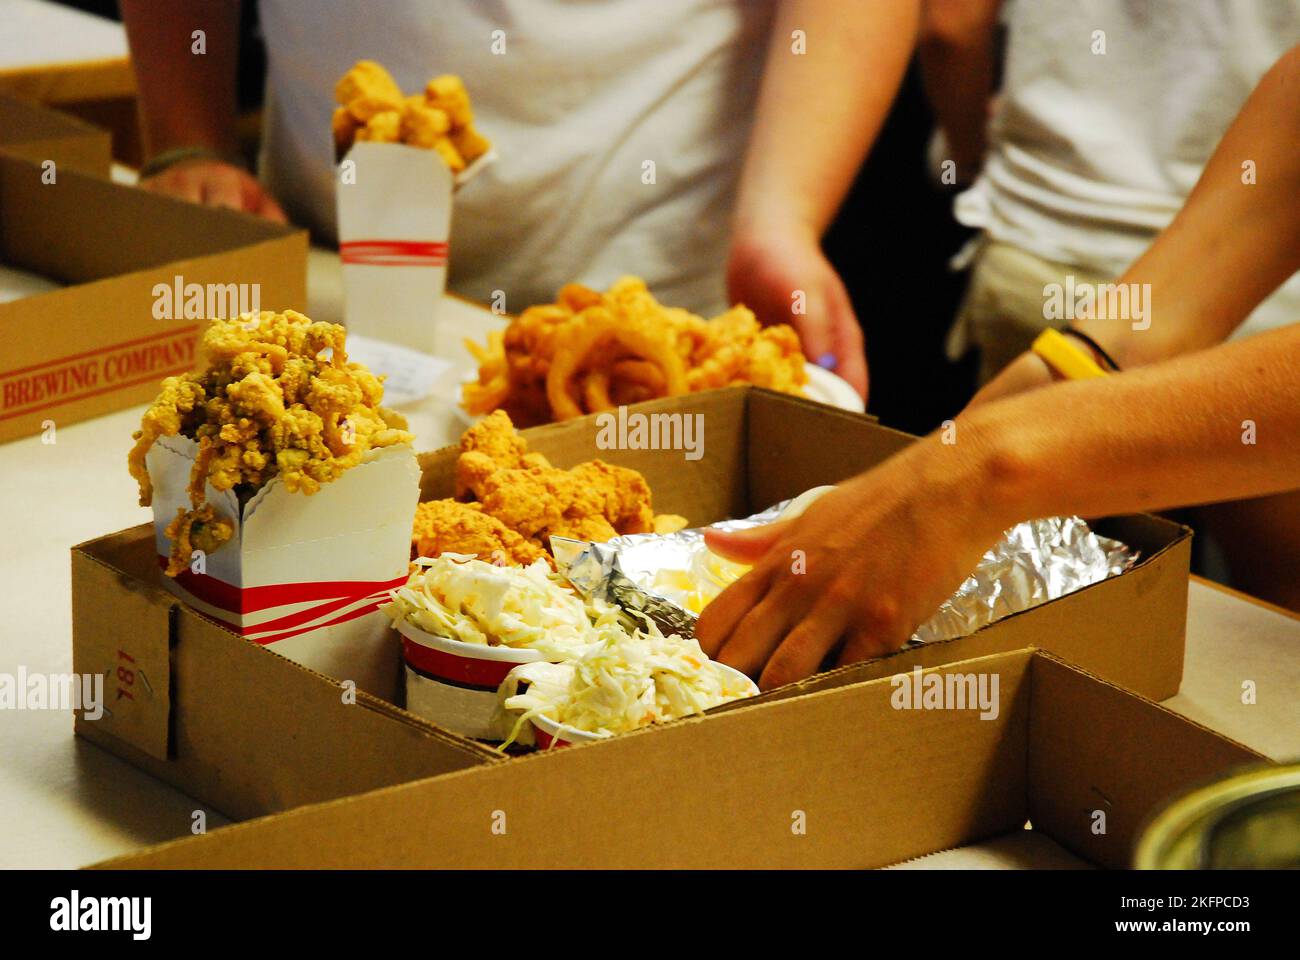 Workers' hands move quickly to prepare and pack a take out order at a busy and fast paced seafood restaurant Stock Photo